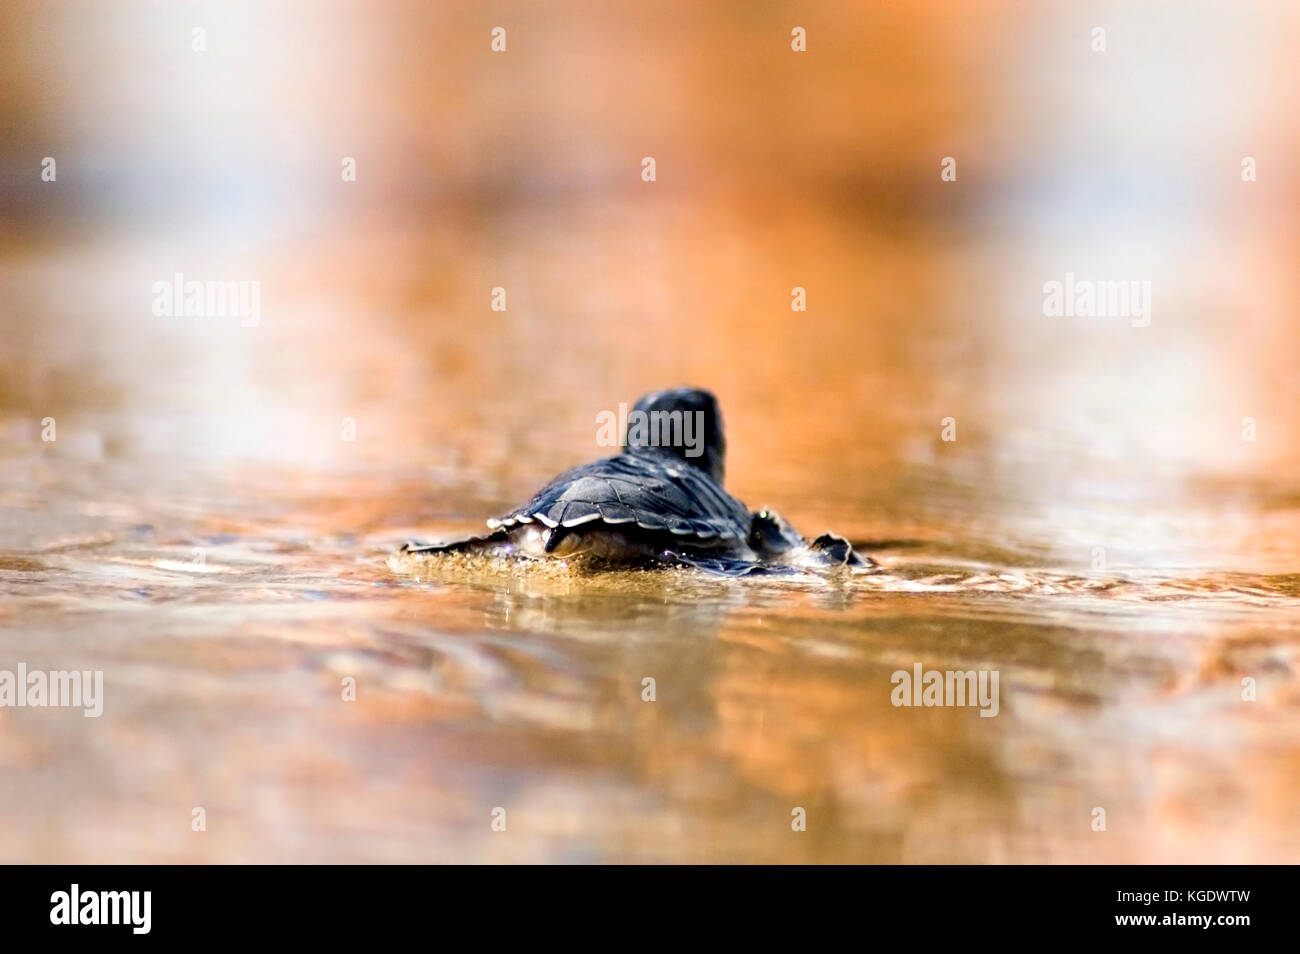 Israel, Maagan Michael beach, Chelonia mydas, green turtle after hatching on their first voyage to the Mediterranean Sea wading in the shallow water.  Stock Photo